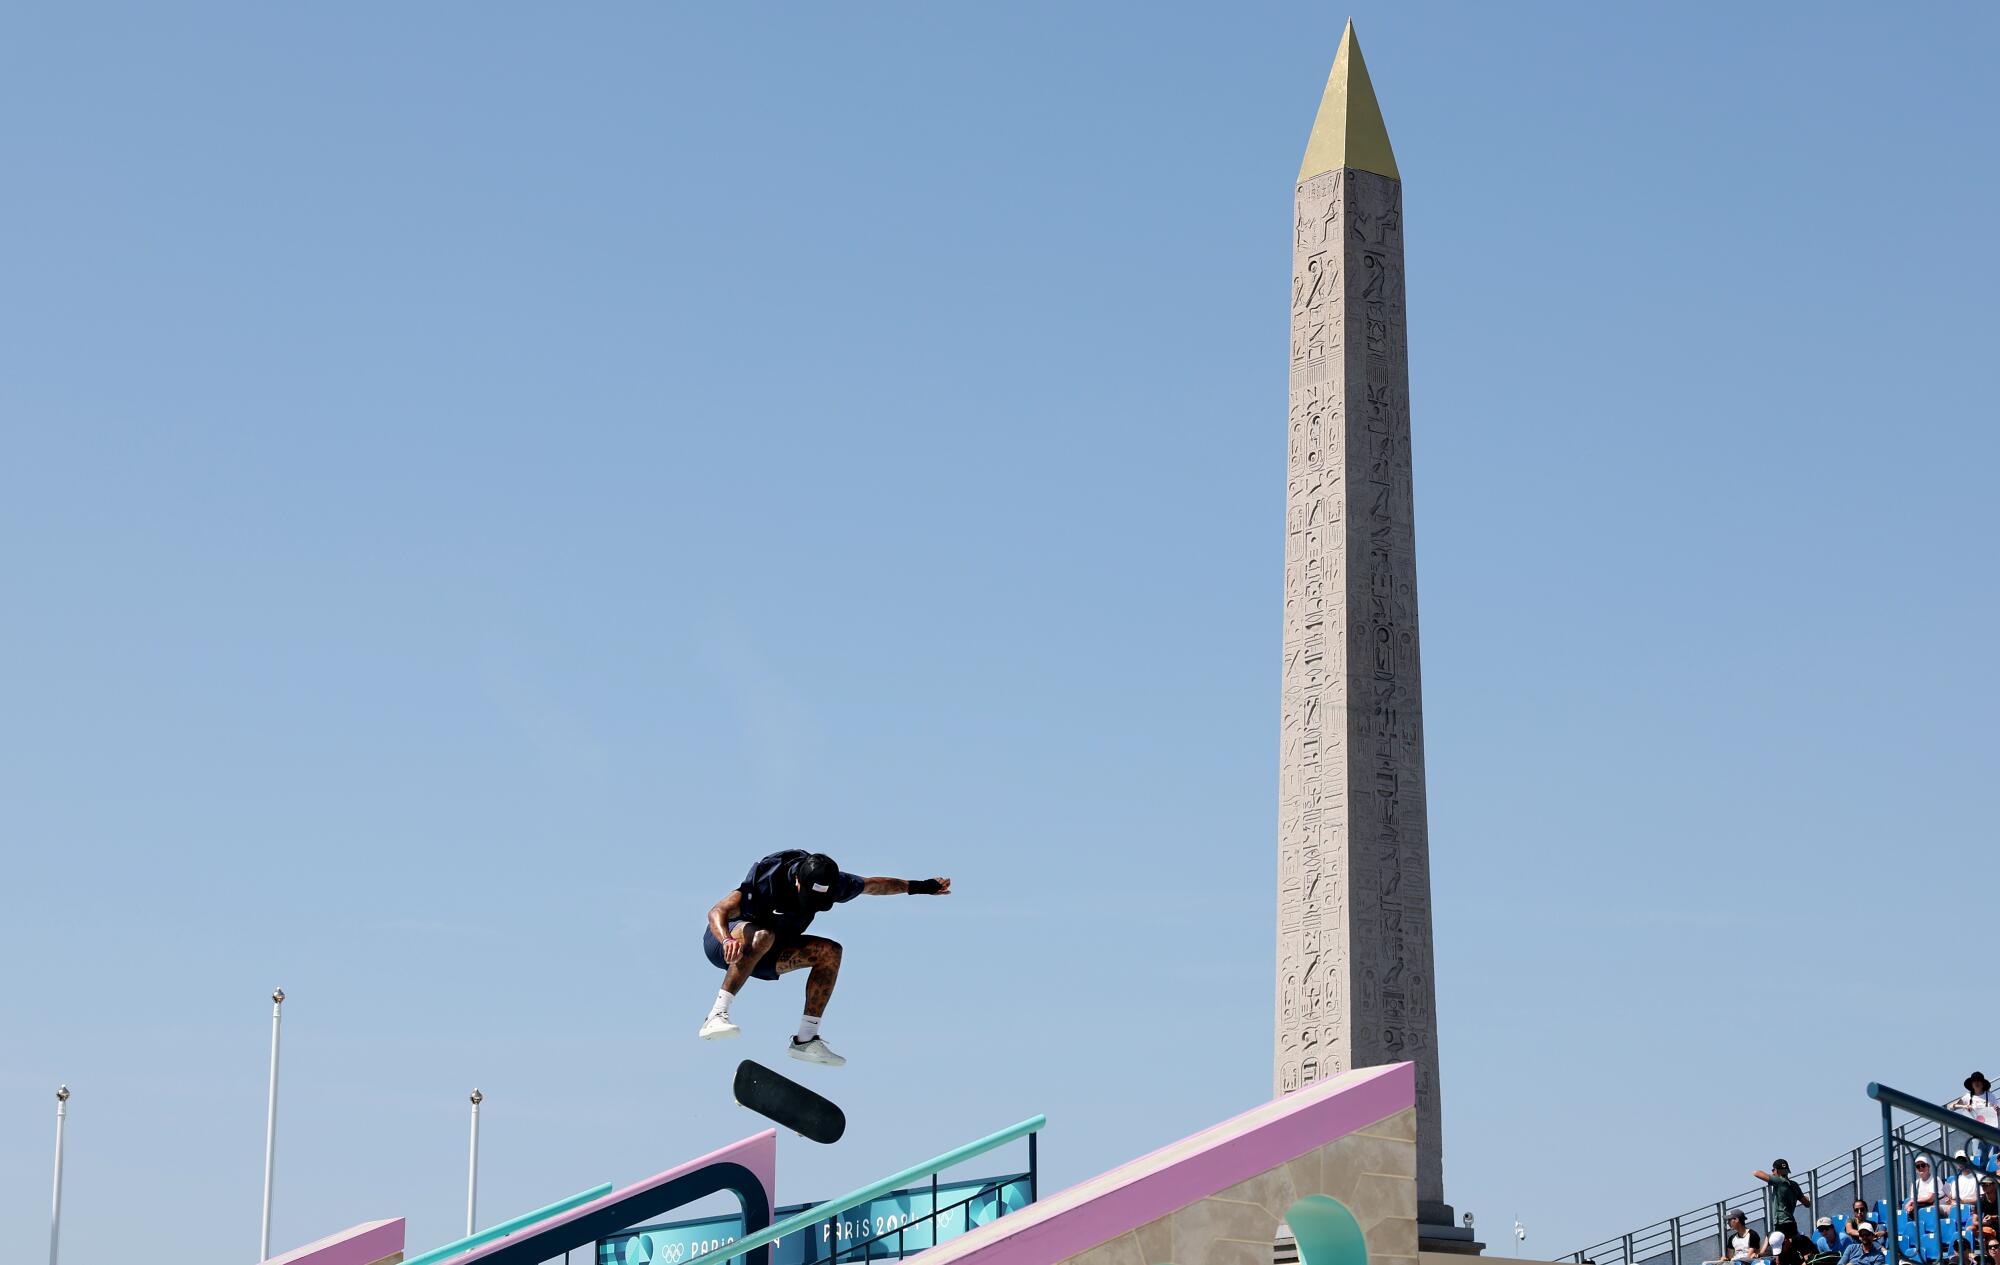 Nyjah Huston completes a trick in the Olympic skateboarding street preliminaries.